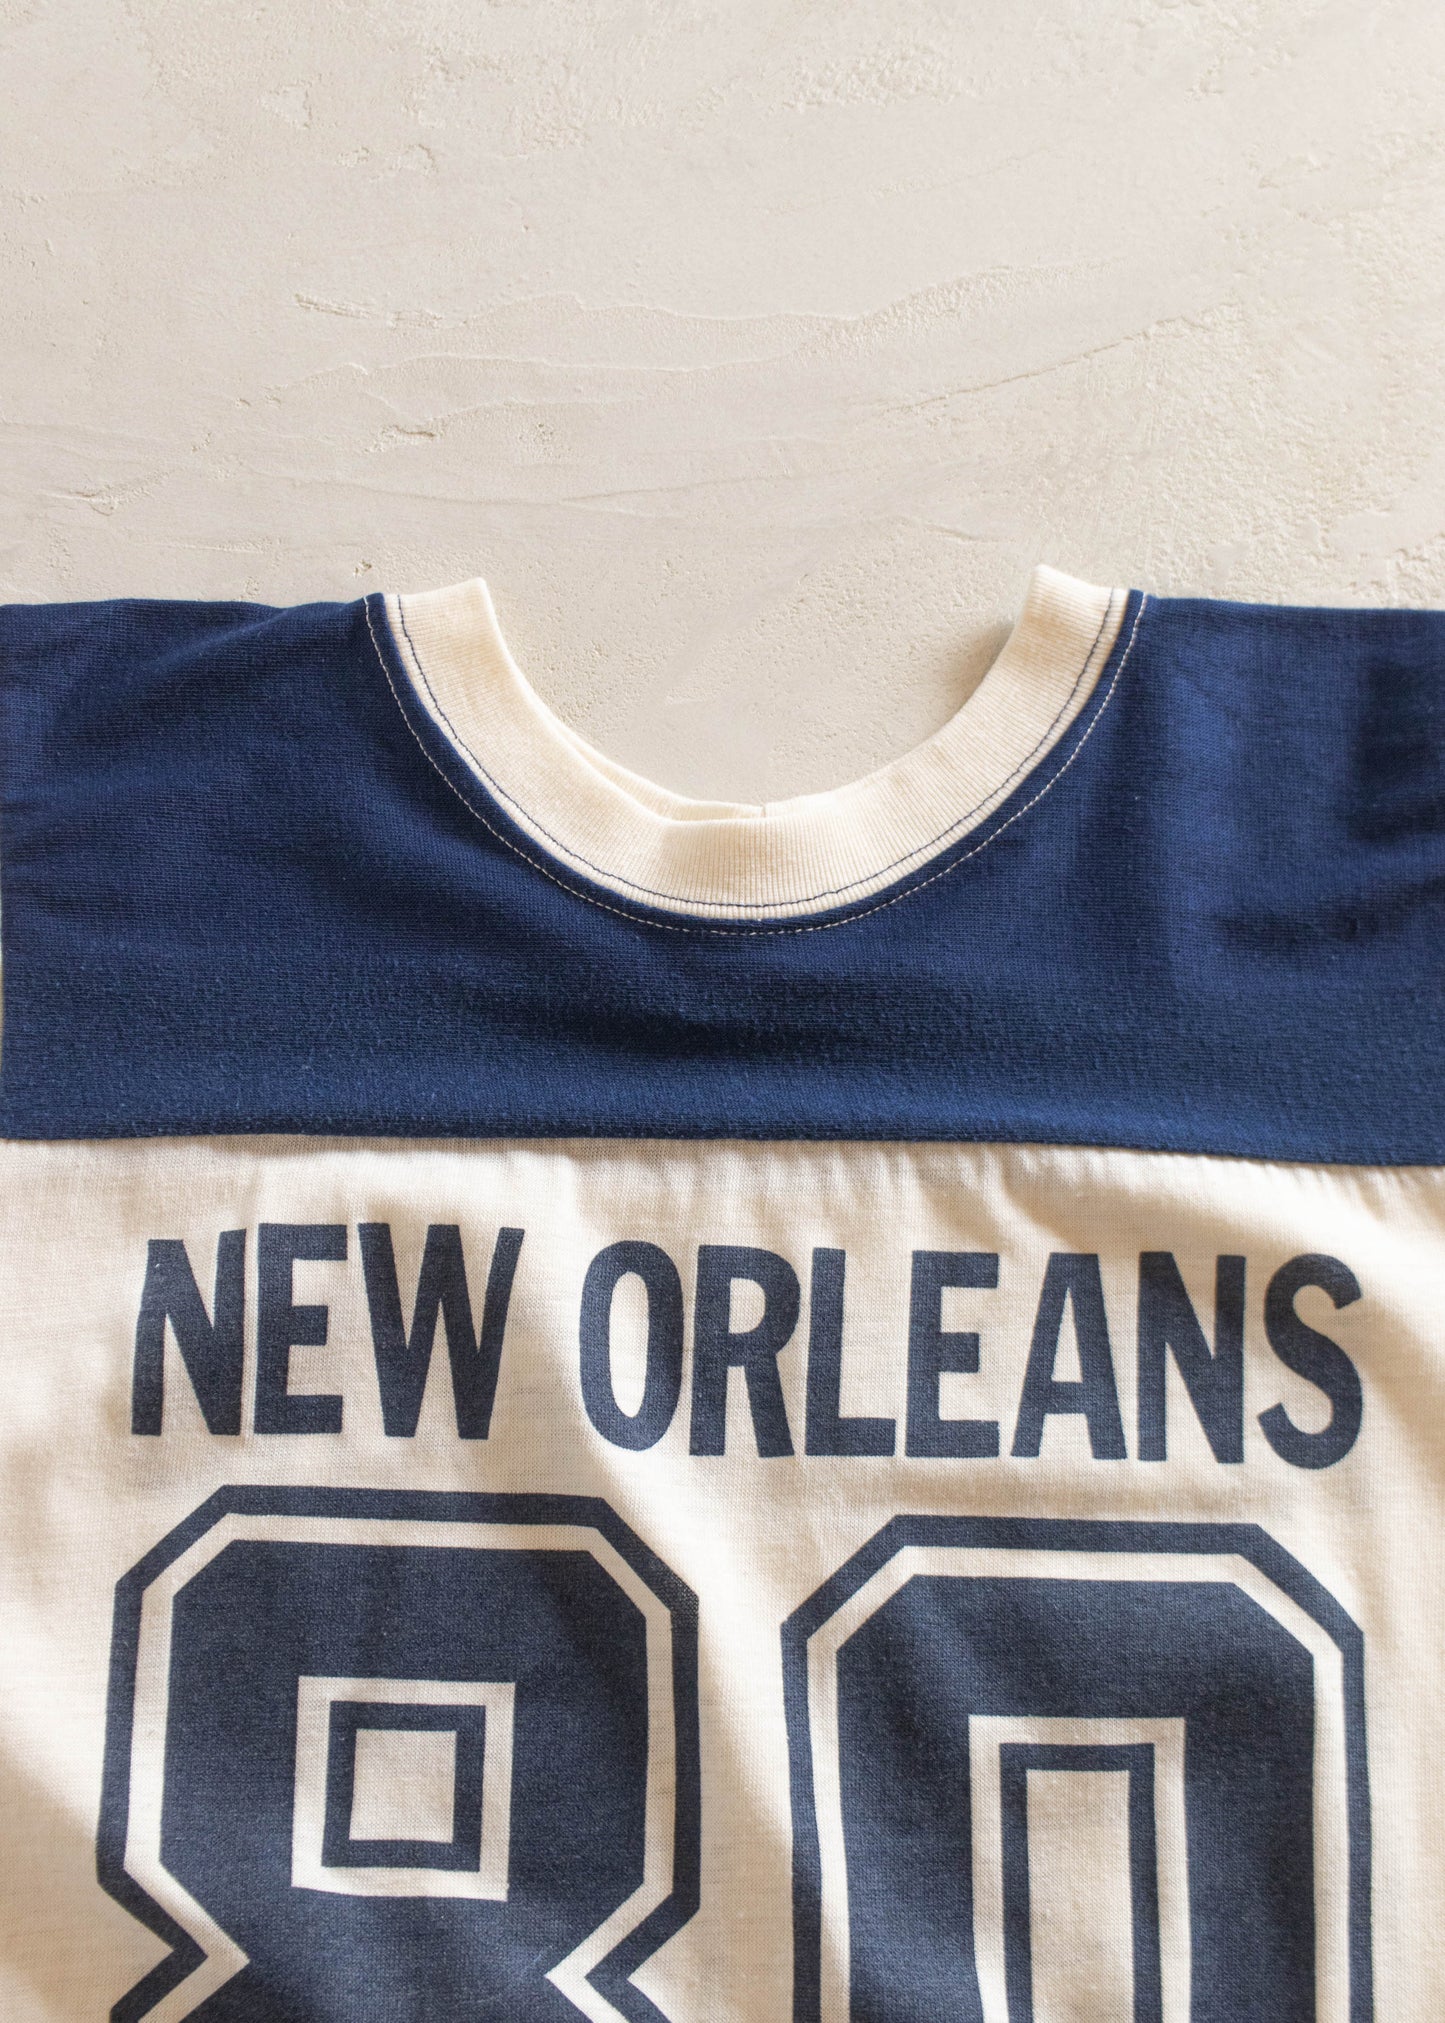 1970s New Orleans Sport T-Shirt Size XS/S